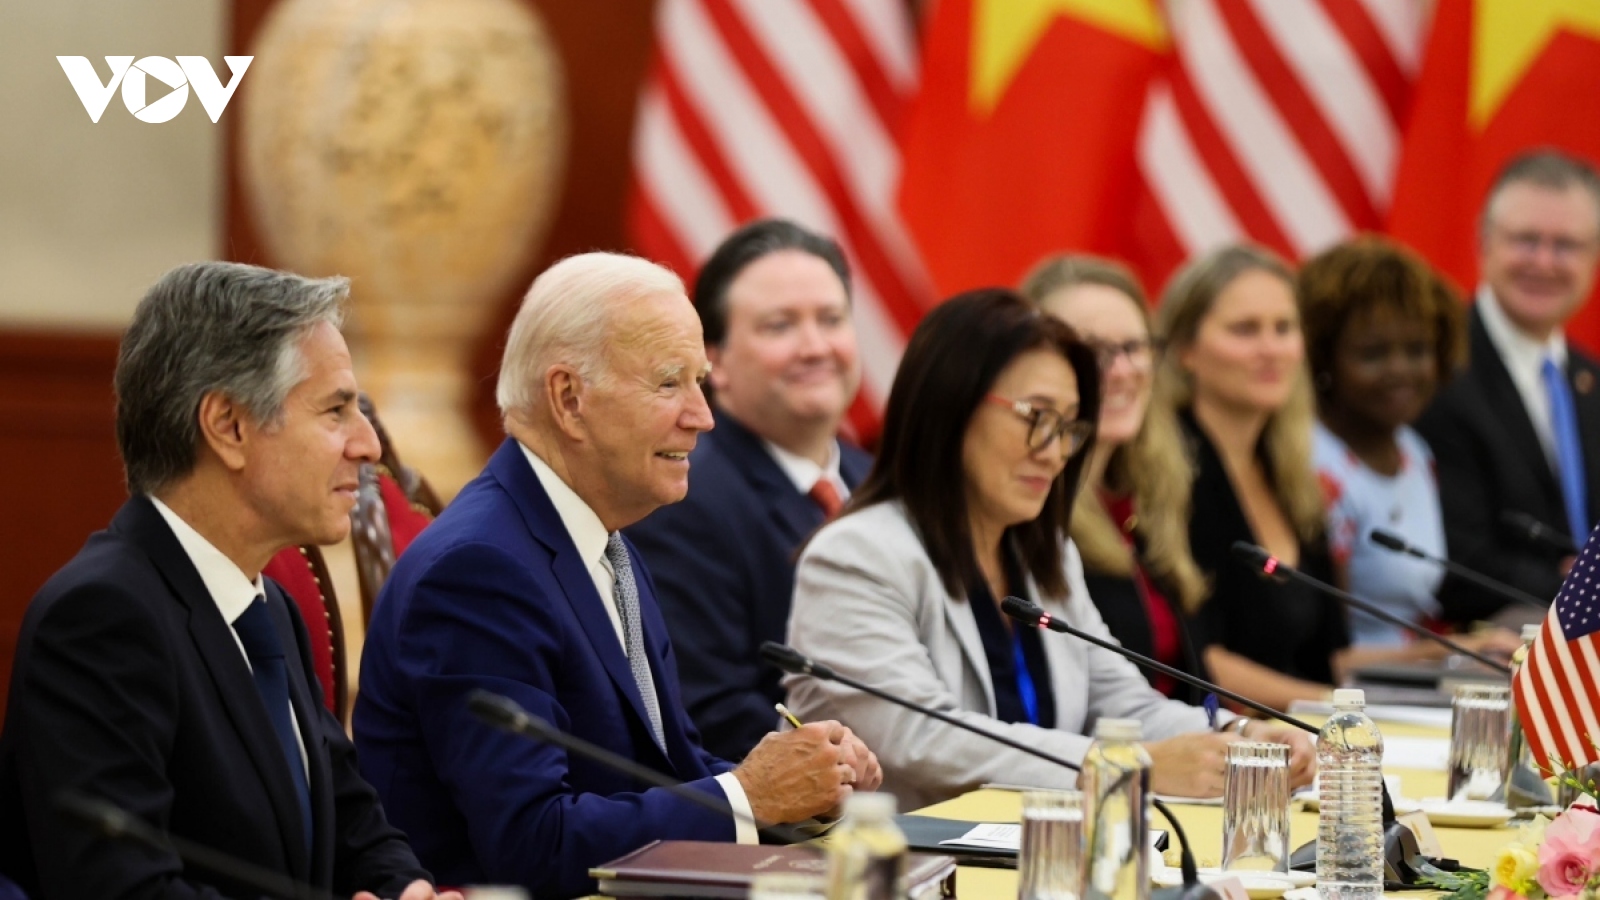 US President Biden proud to have strengthened relations with Vietnam